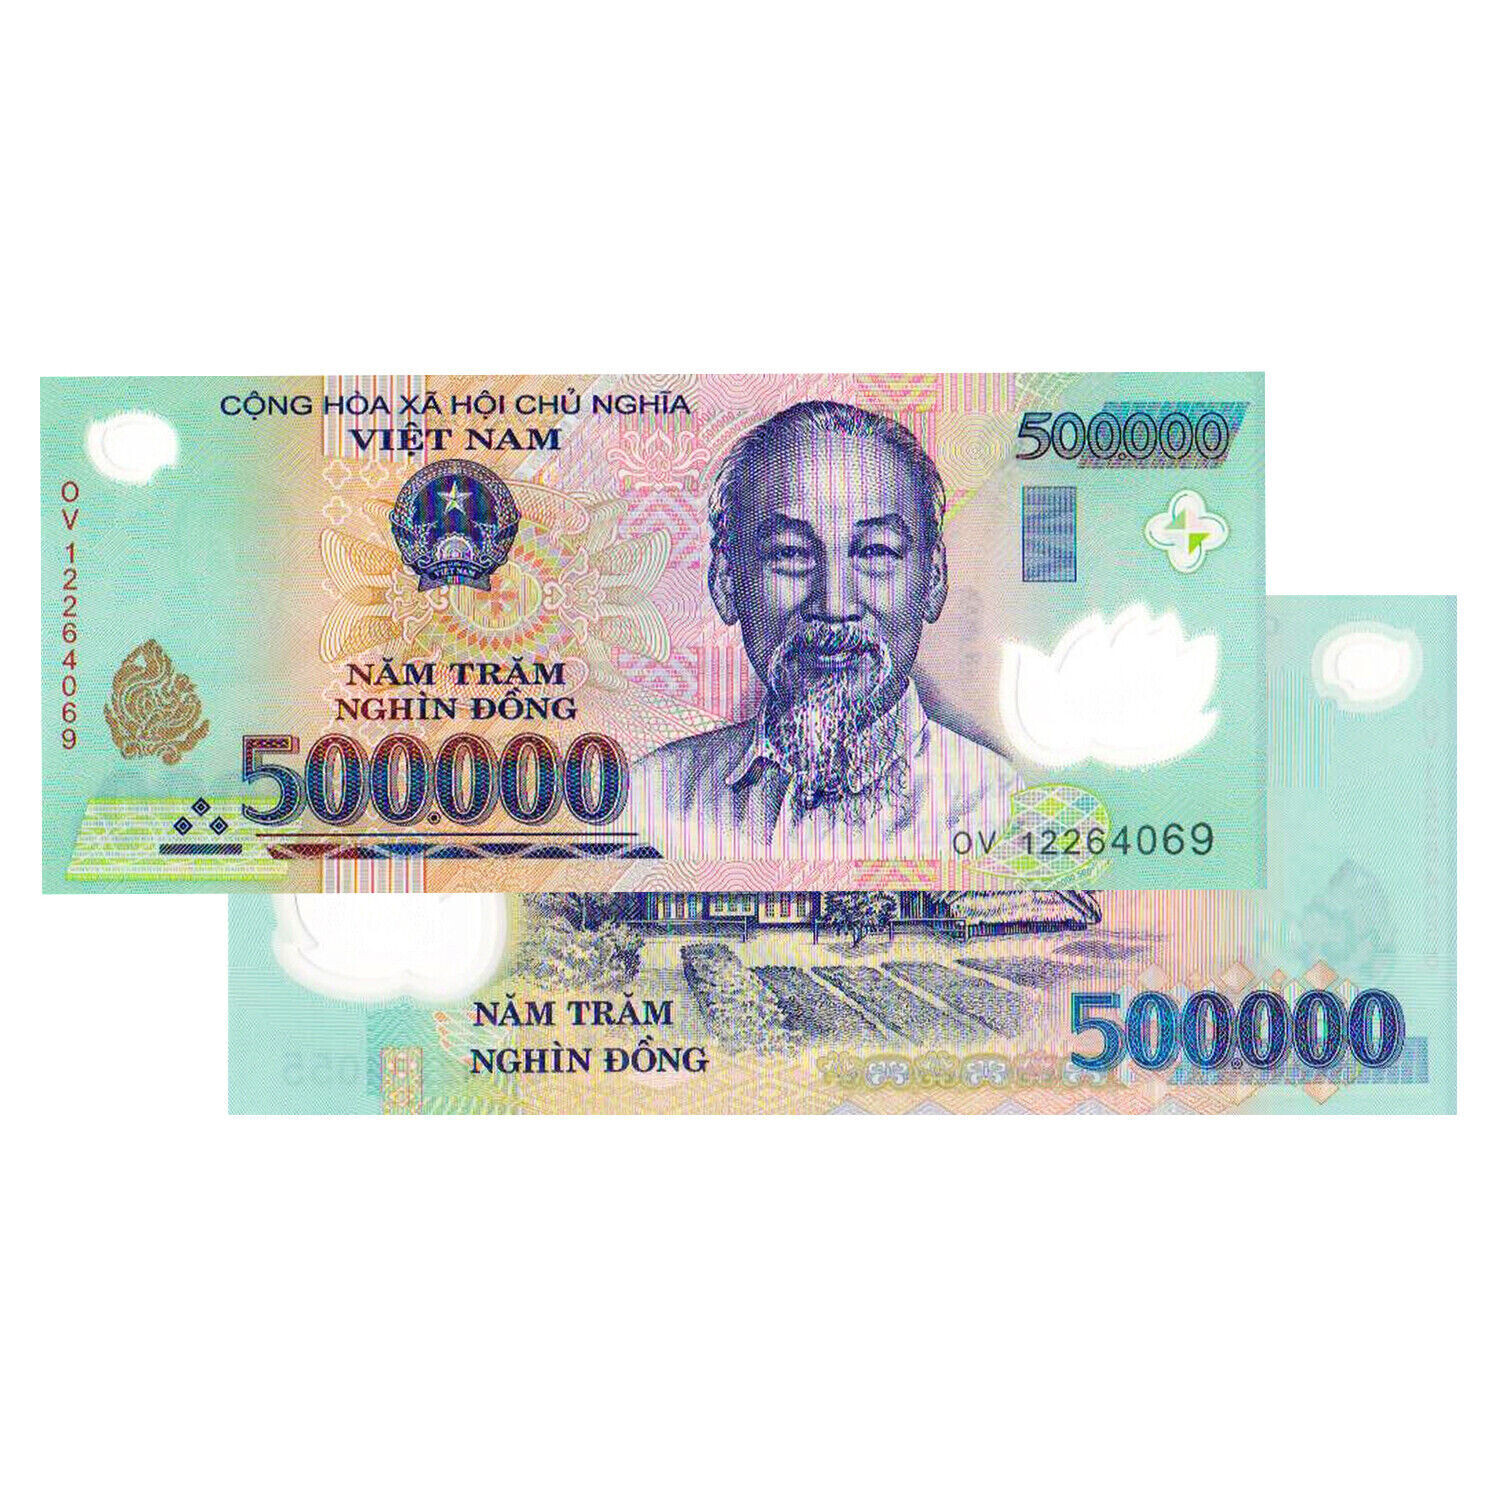 Vietnam 500,000 Dong Banknote VND, Polymer, Uncirculated